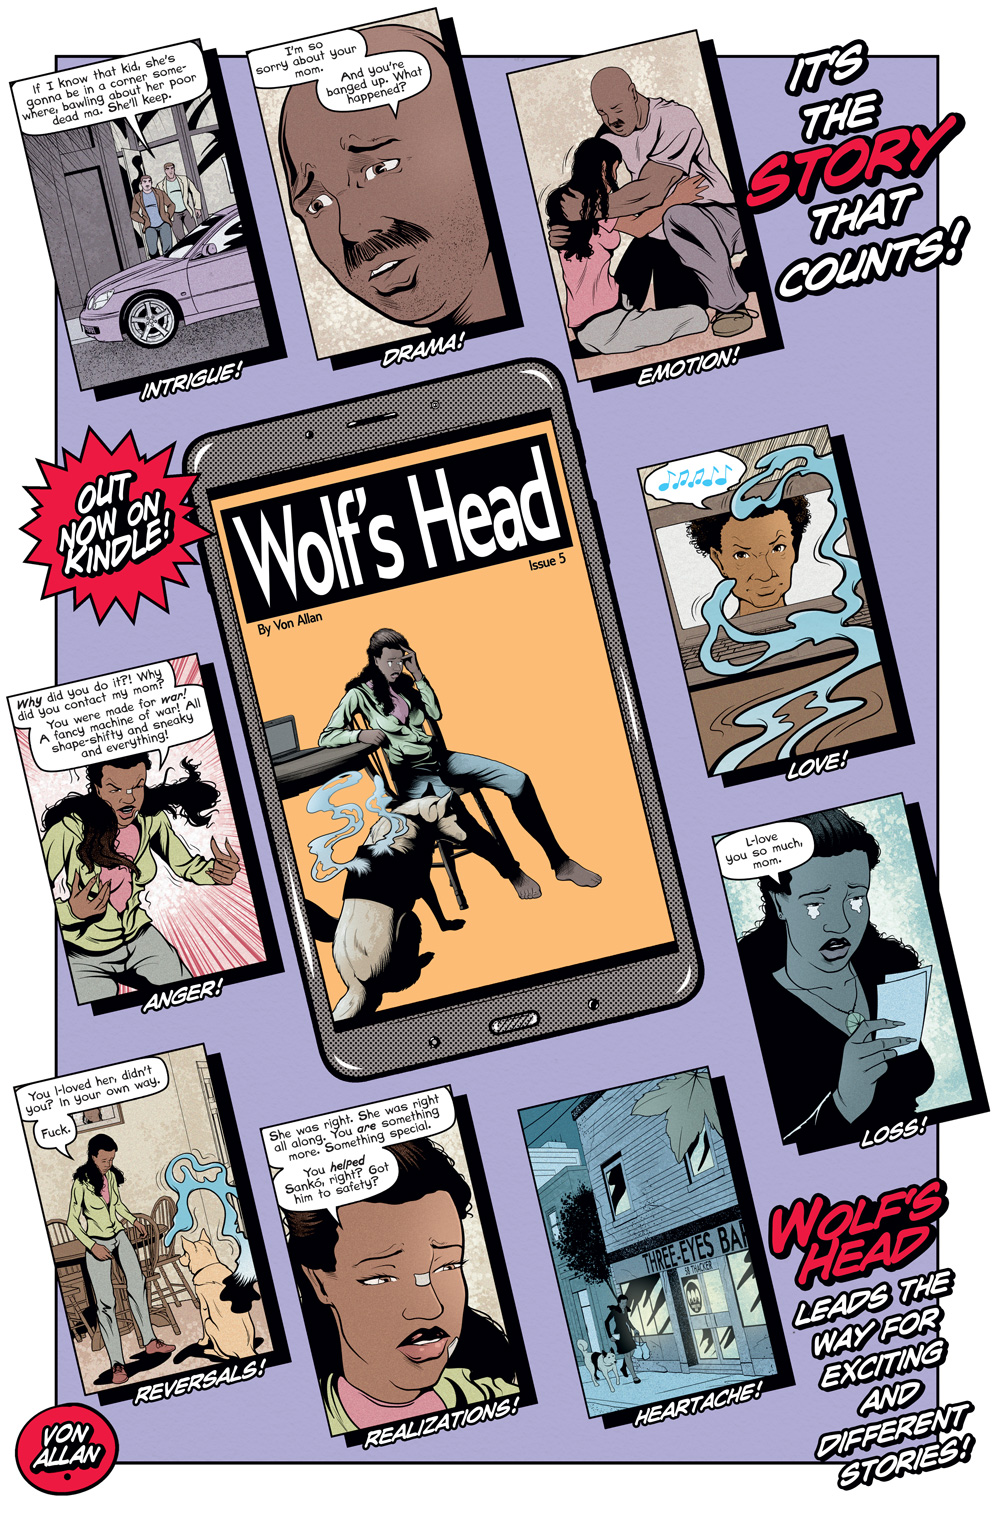 Teaser image for the digital edition of WOLF'S HEAD issue 5 written and illustrated by Von Allan